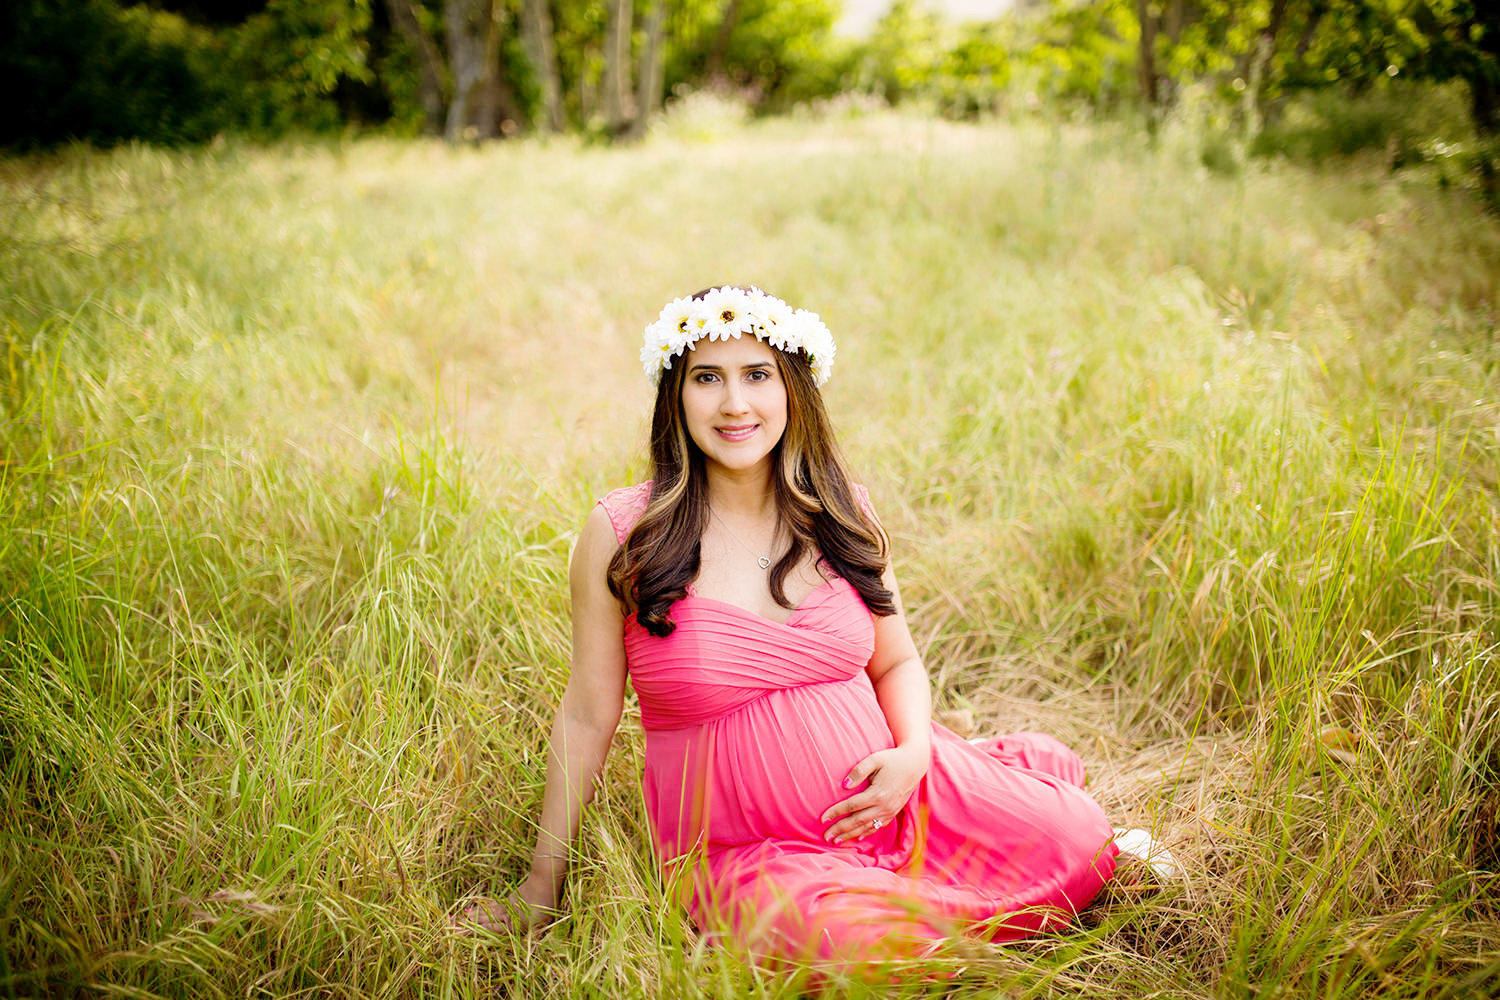 Beautiful flower headpiece for this Maternity Session in San Diego.